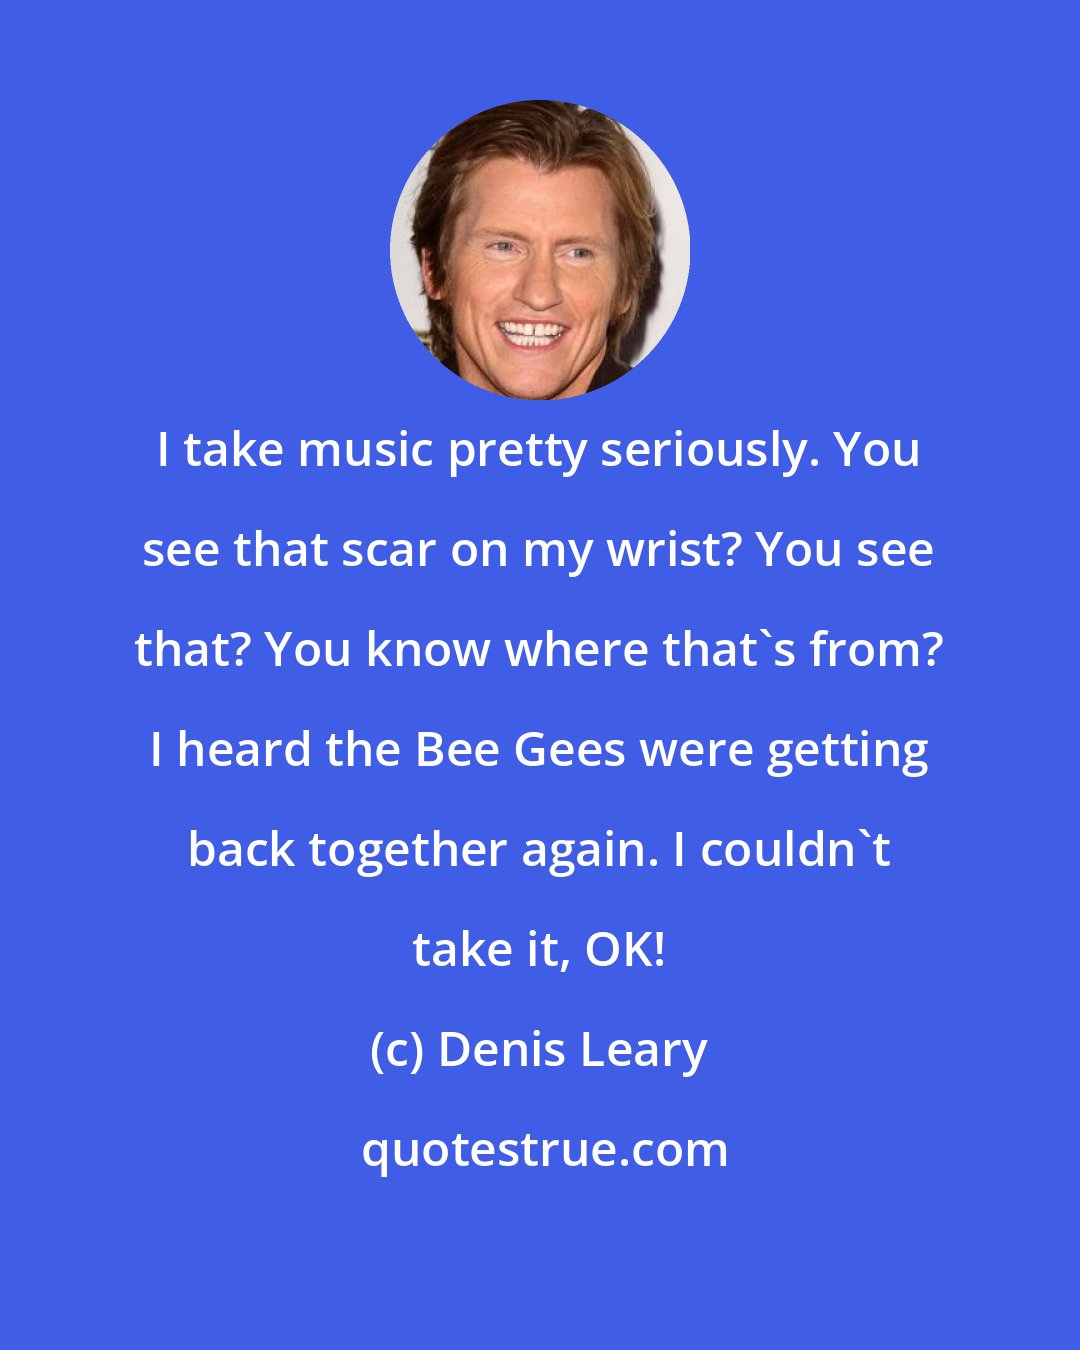 Denis Leary: I take music pretty seriously. You see that scar on my wrist? You see that? You know where that's from? I heard the Bee Gees were getting back together again. I couldn't take it, OK!